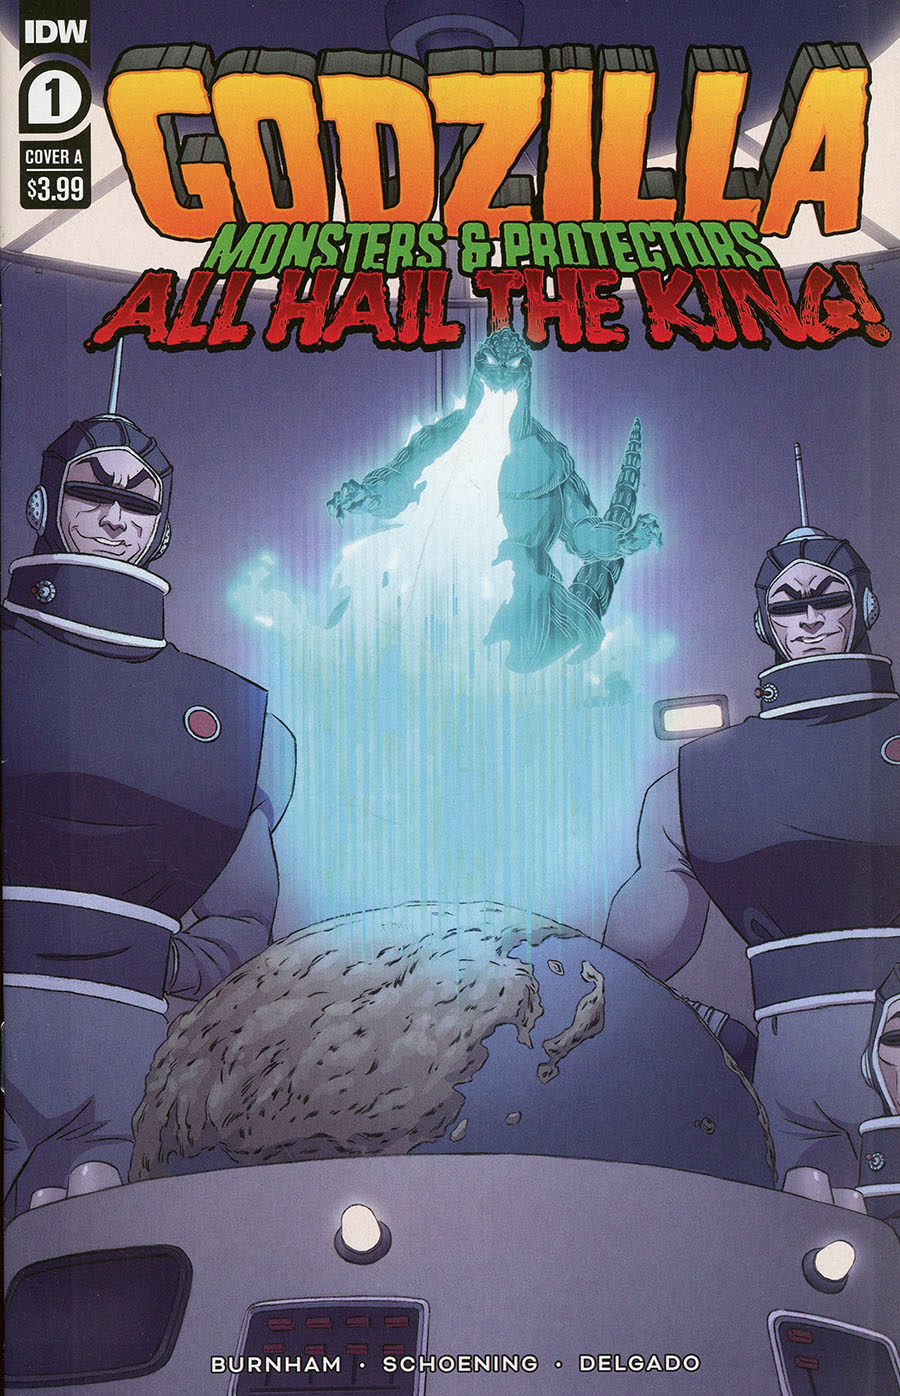 Godzilla Monsters & Protectors All Hail The King #1 Cover A Regular Dan Schoening Cover